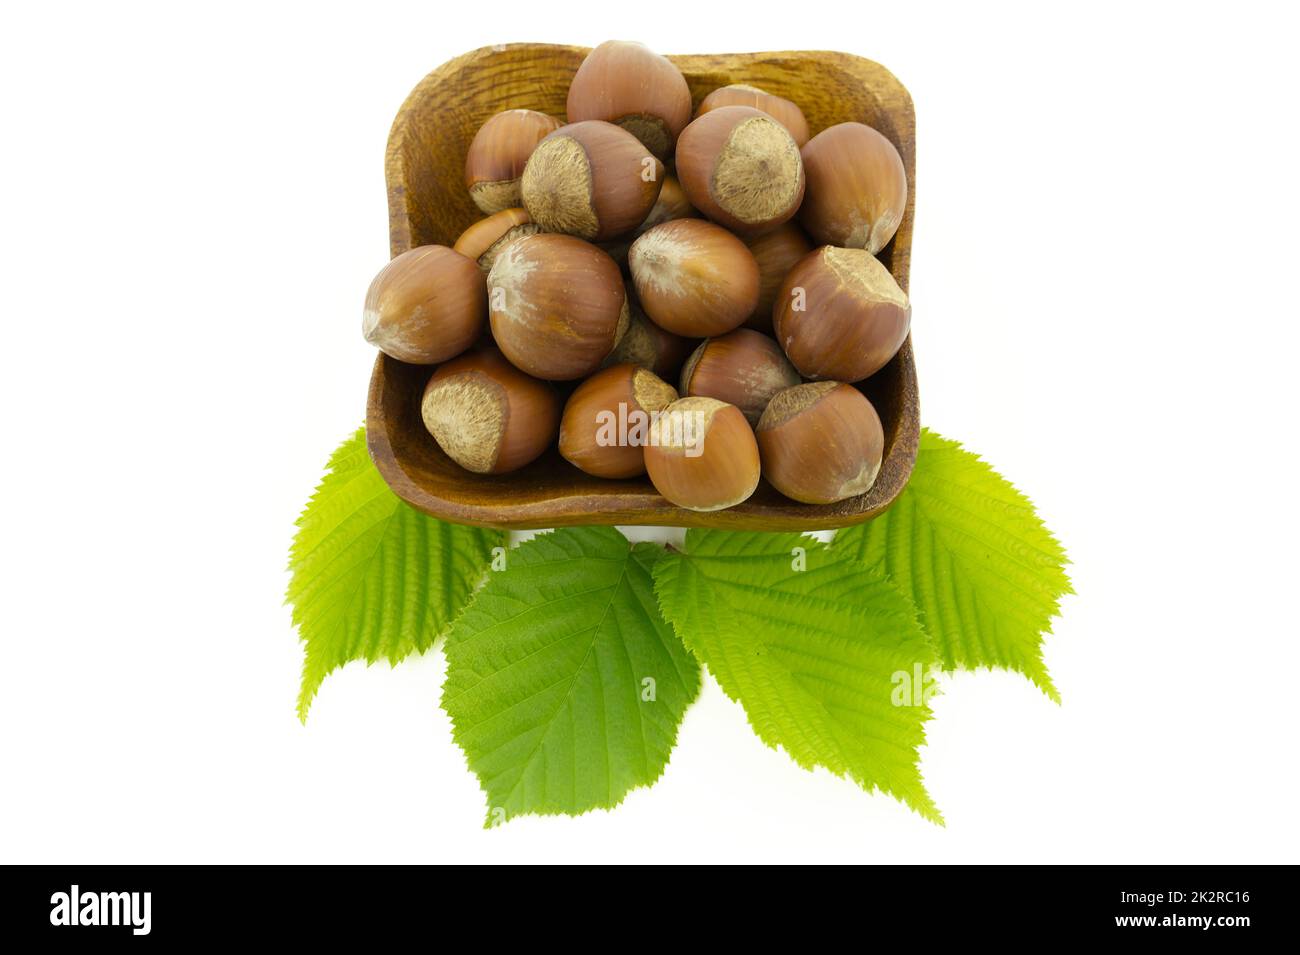 Fresh unshelled hazelnuts in a wooden plate Stock Photo